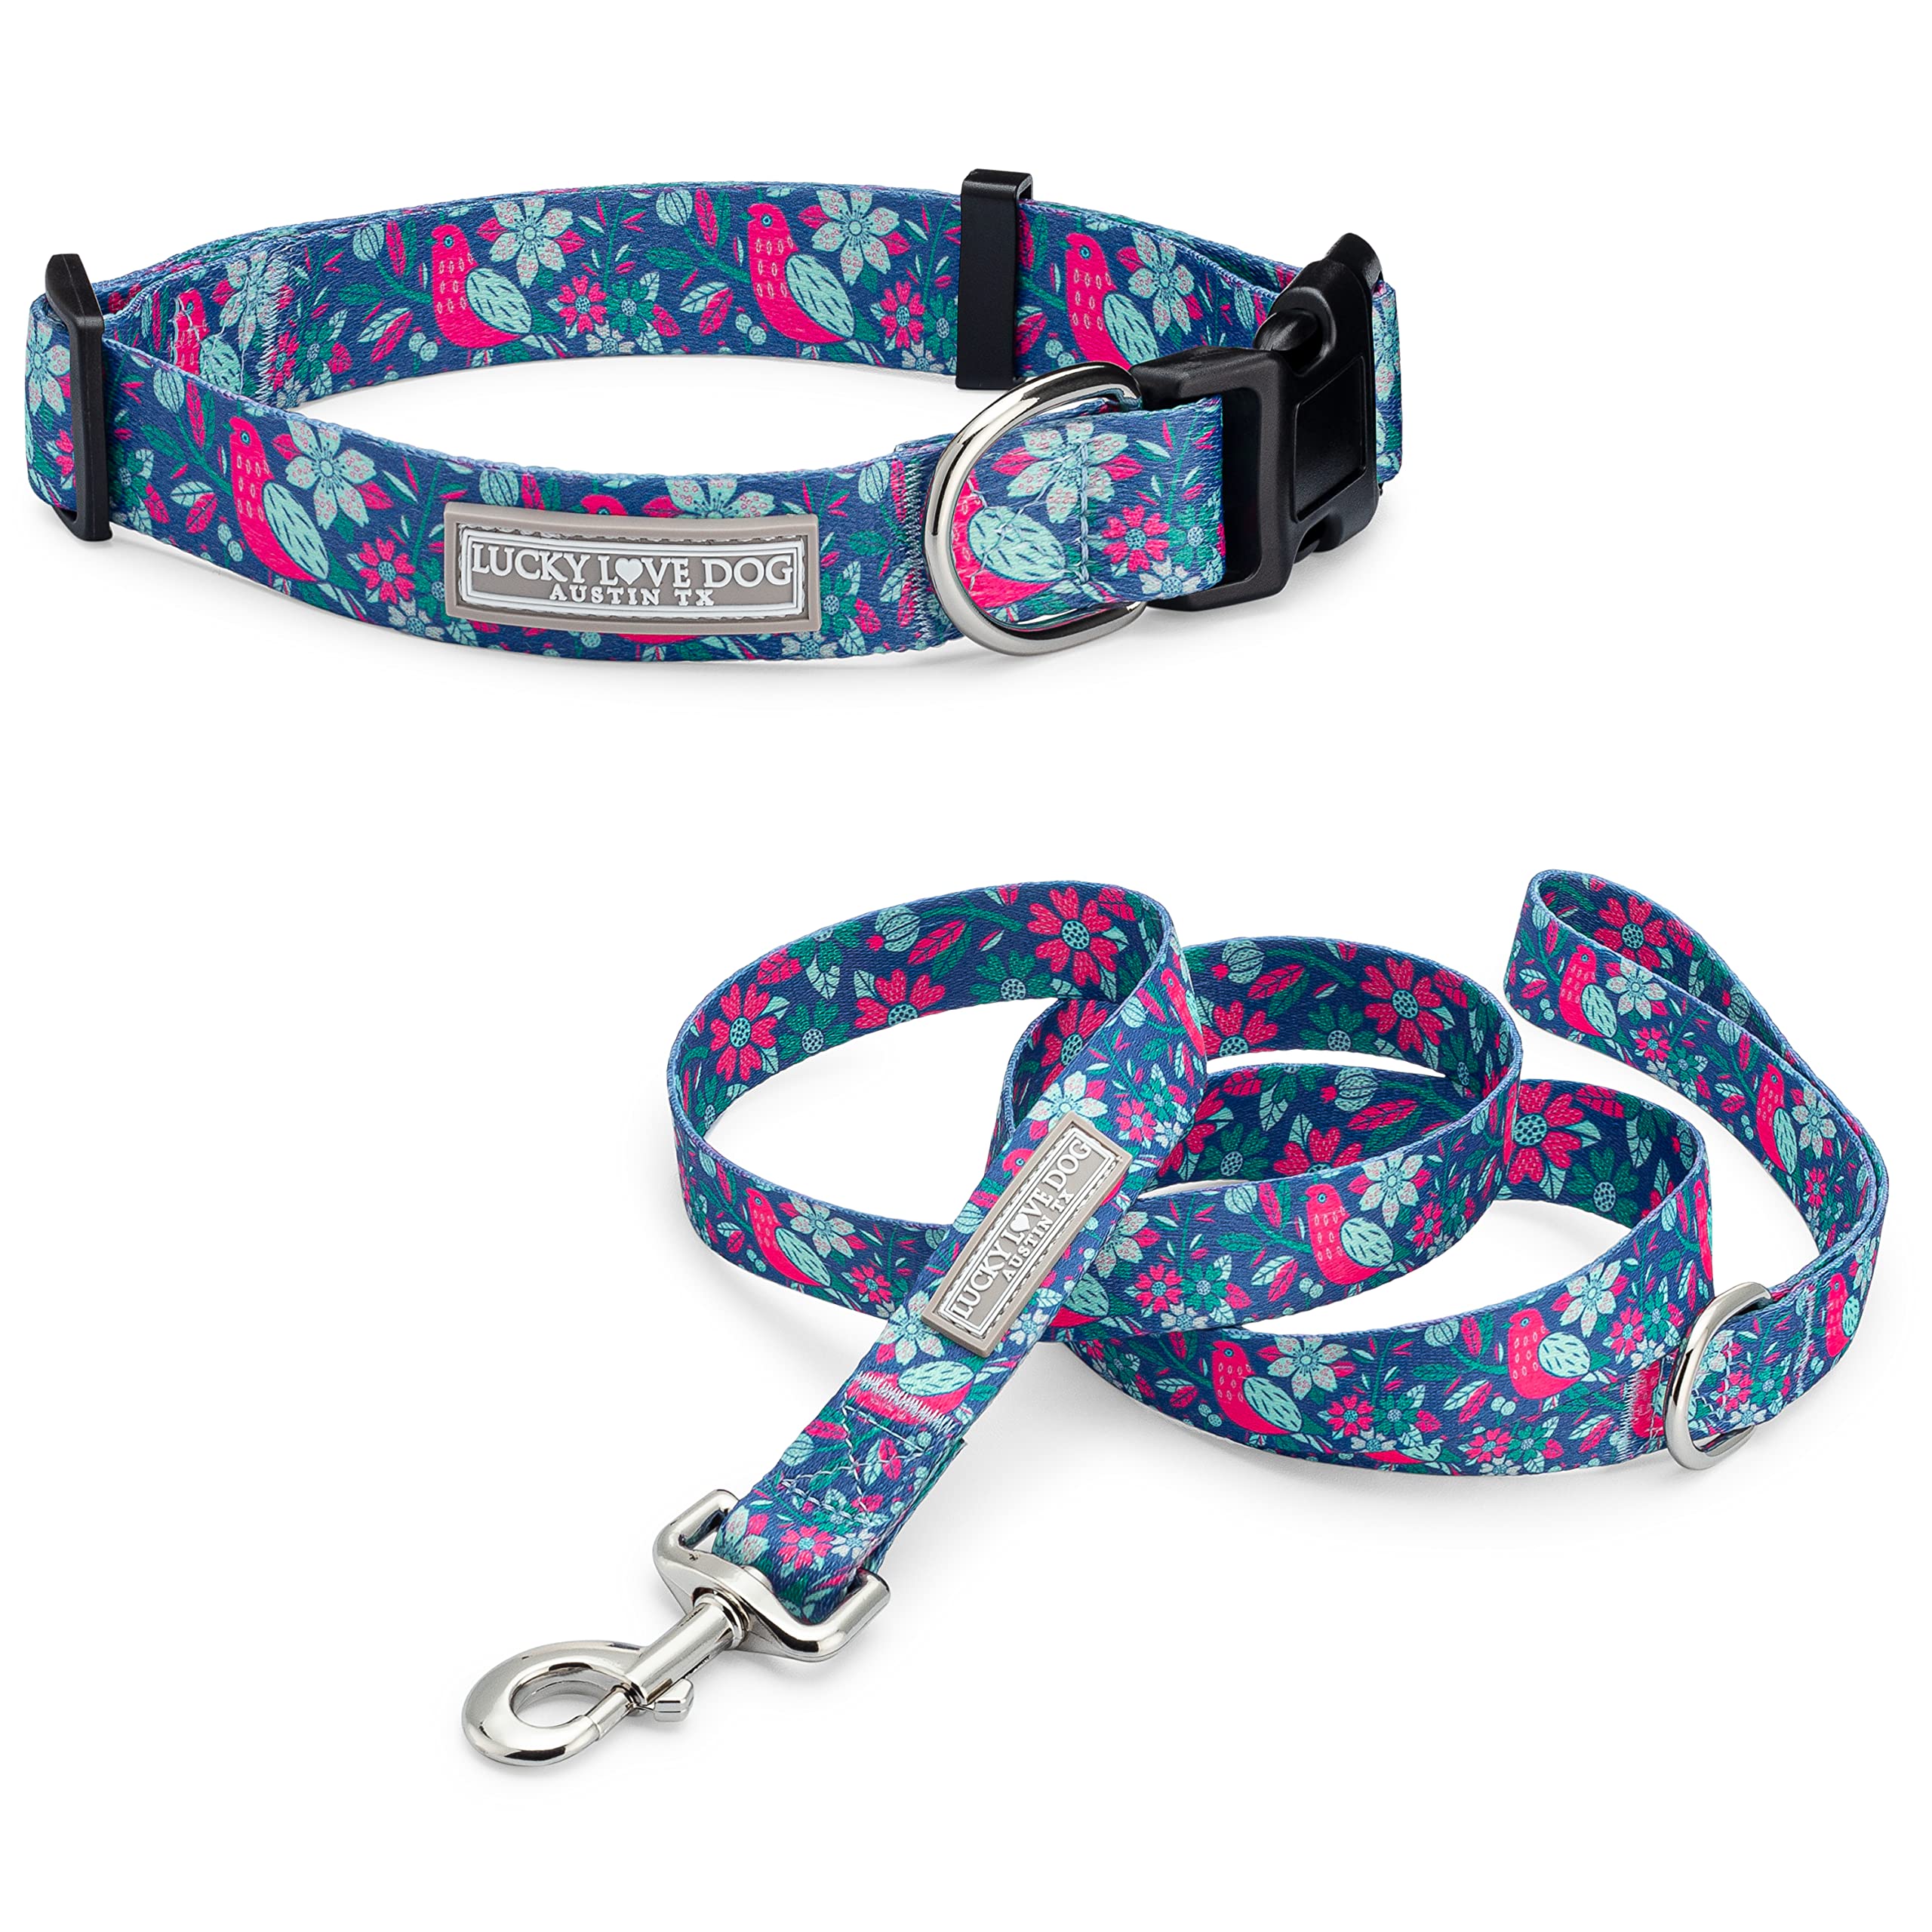 Lucky Love Dog Collar and Leash Combo, Vivid Floral Matching Girl Dog Leash and Collar Set for Large Dogs - (CarrieBelle Combo, 